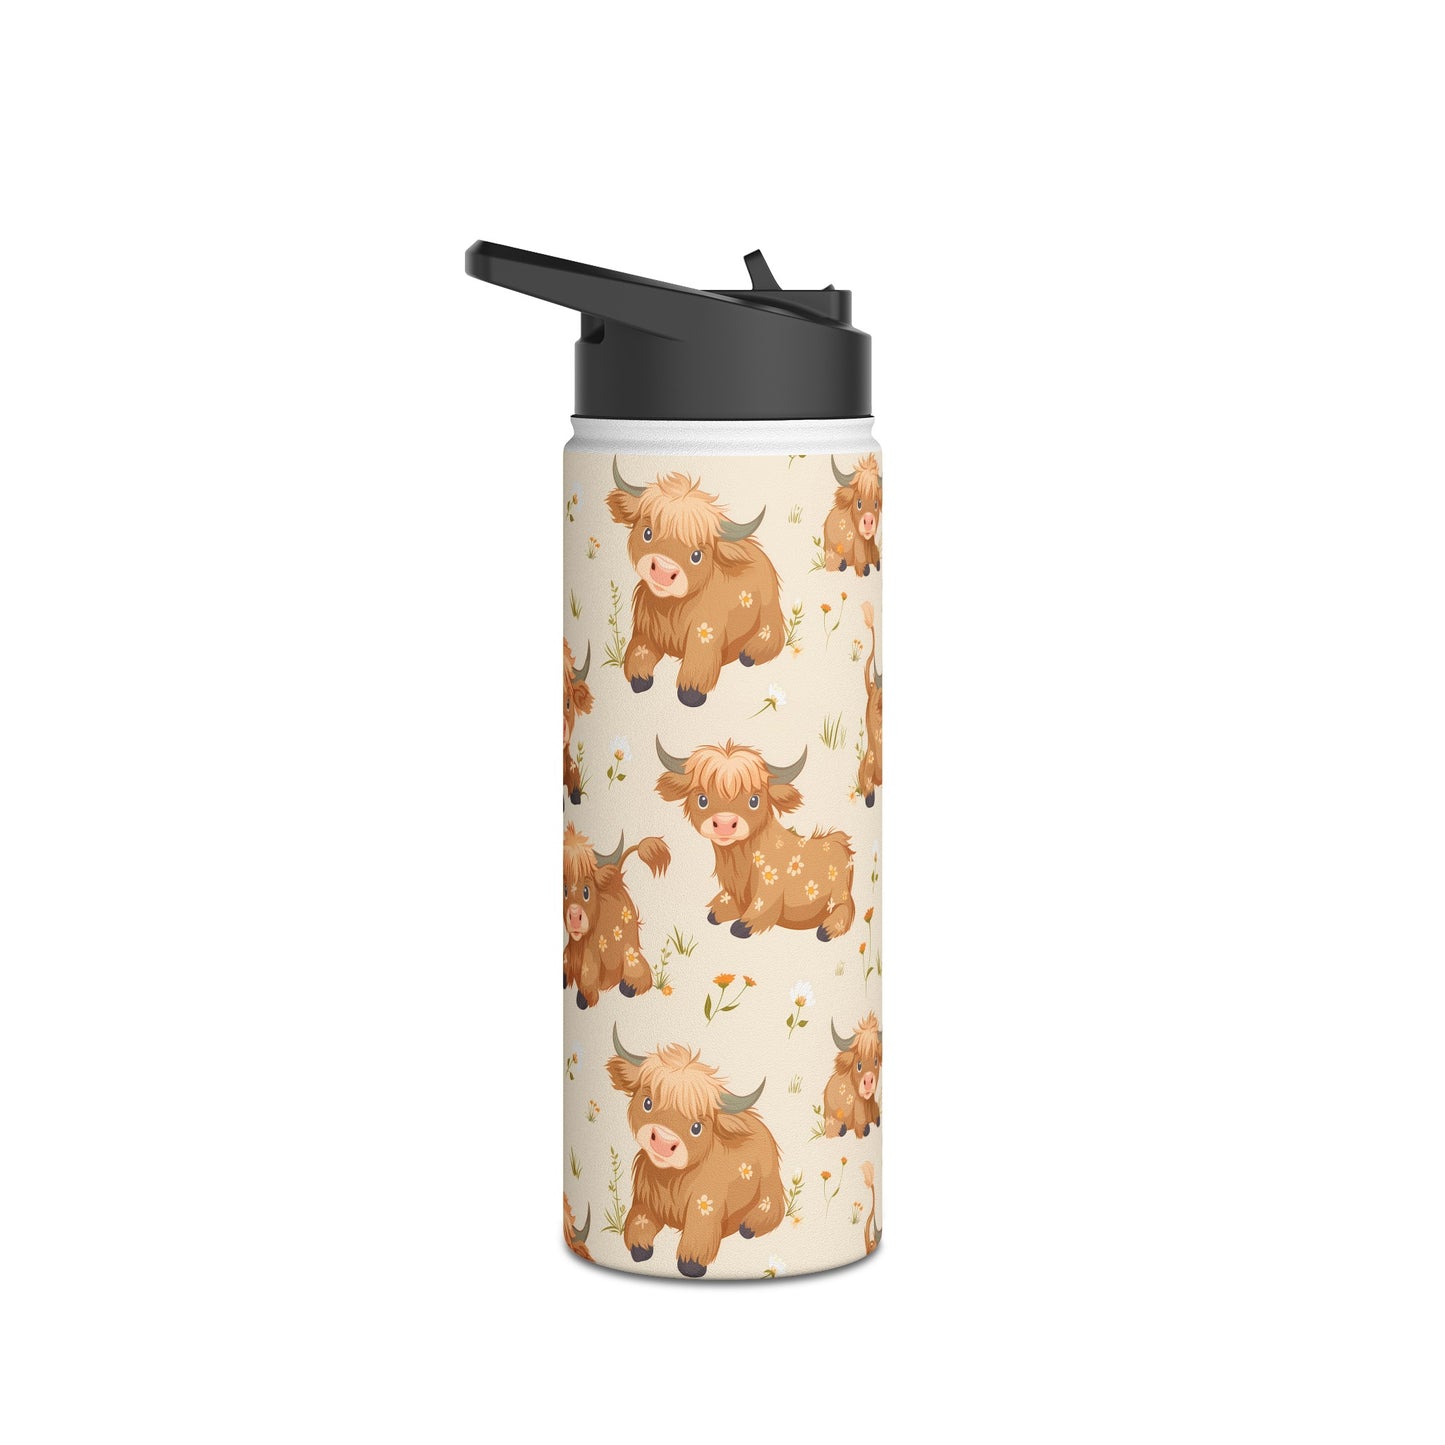 Insulated Water Bottle Thermos, 18oz, Cute Highland Cow - Double Walled Stainless Steel, Keeps Drinks Hot or Cold